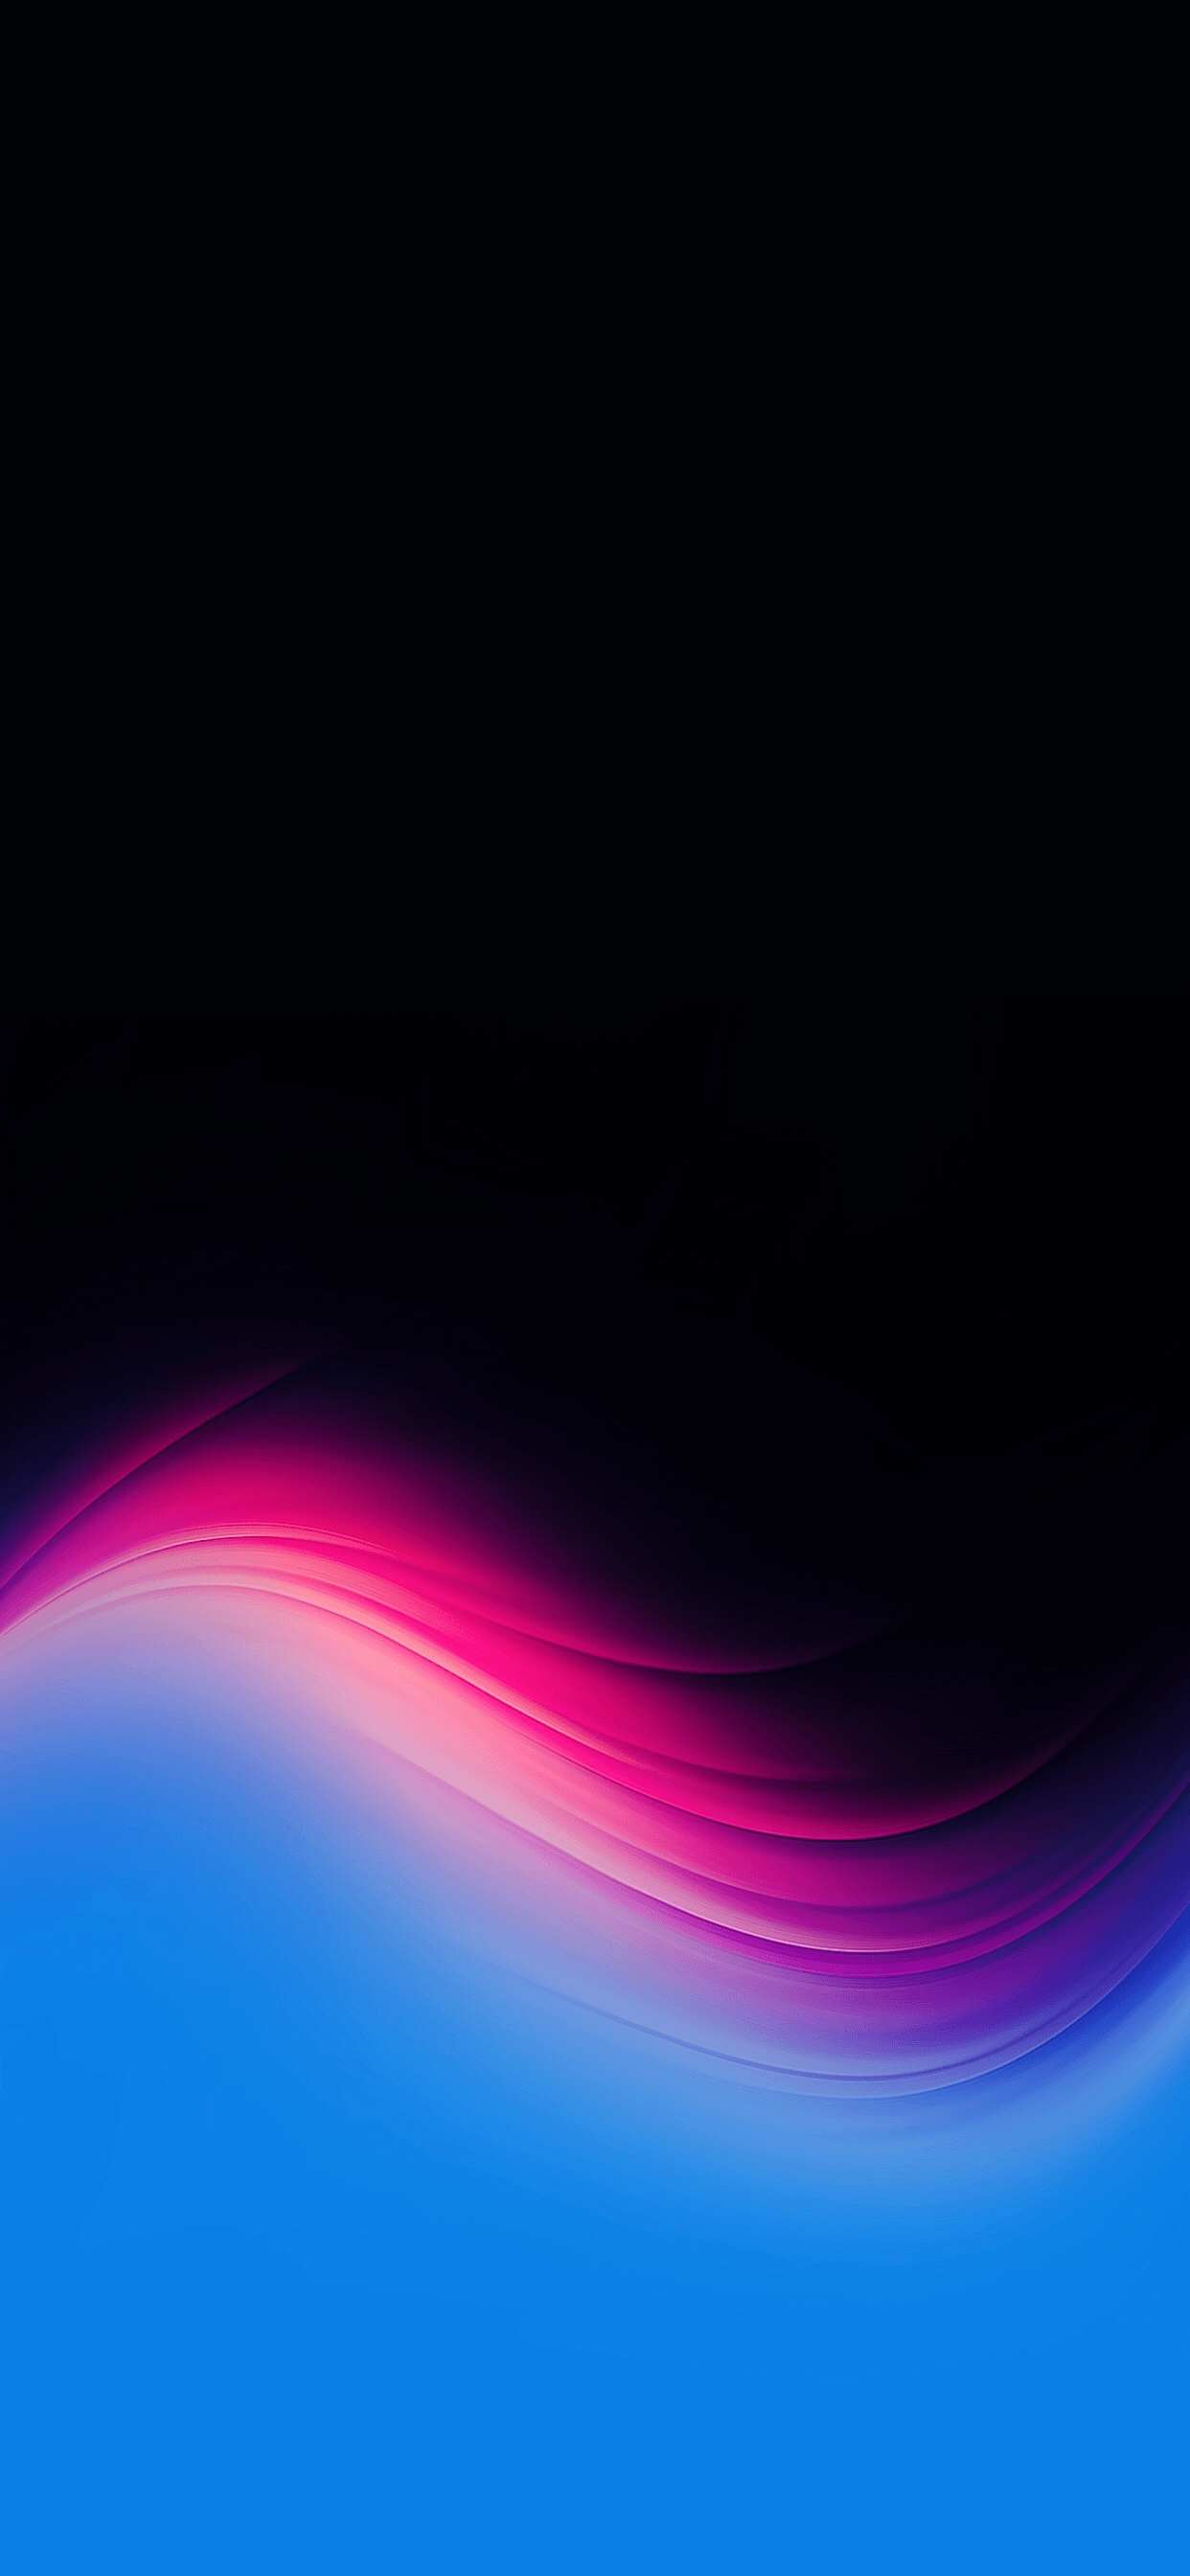 Blue iPhone Wallpapers on WallpaperDog